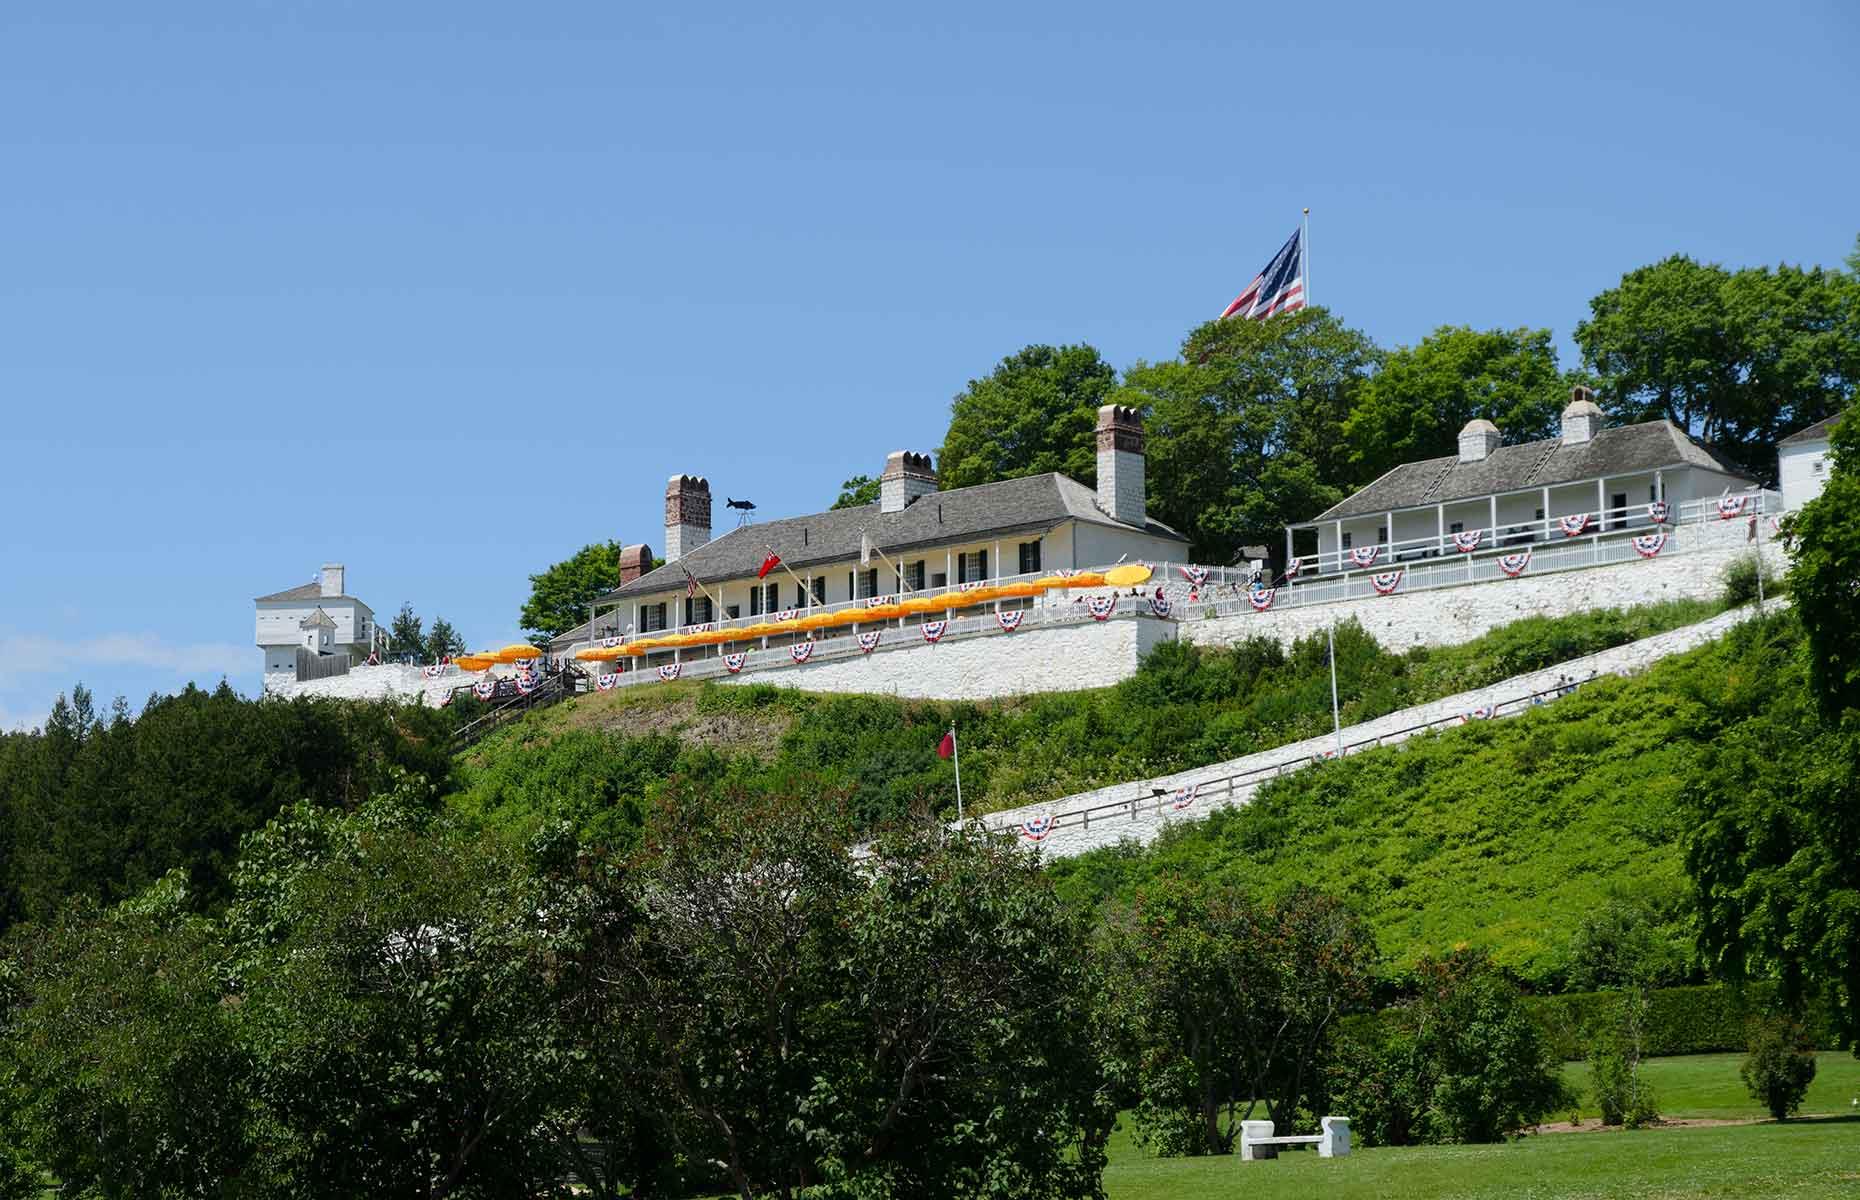 <p>Get hands-on with history at <a href="https://www.mackinacparks.com/parks-and-attractions/fort-mackinac/">Fort Mackinac</a> on Mackinac Island, northern Michigan. The former military outpost was built by the British army between 1780 and 1782 and switched between British and American possession until the US took it for the final time in 1815. It remained active until 1895. The fort is open to the public and boasts themed exhibitions, tours and live programs where you can have a go at firing a cannon.</p>  <p><a href="https://www.loveexploring.com/galleries/114482/ghost-towns-hiding-in-the-worlds-deserts?page=1"><strong>Take a look at these ghost towns hiding in the world's deserts</strong></a></p>